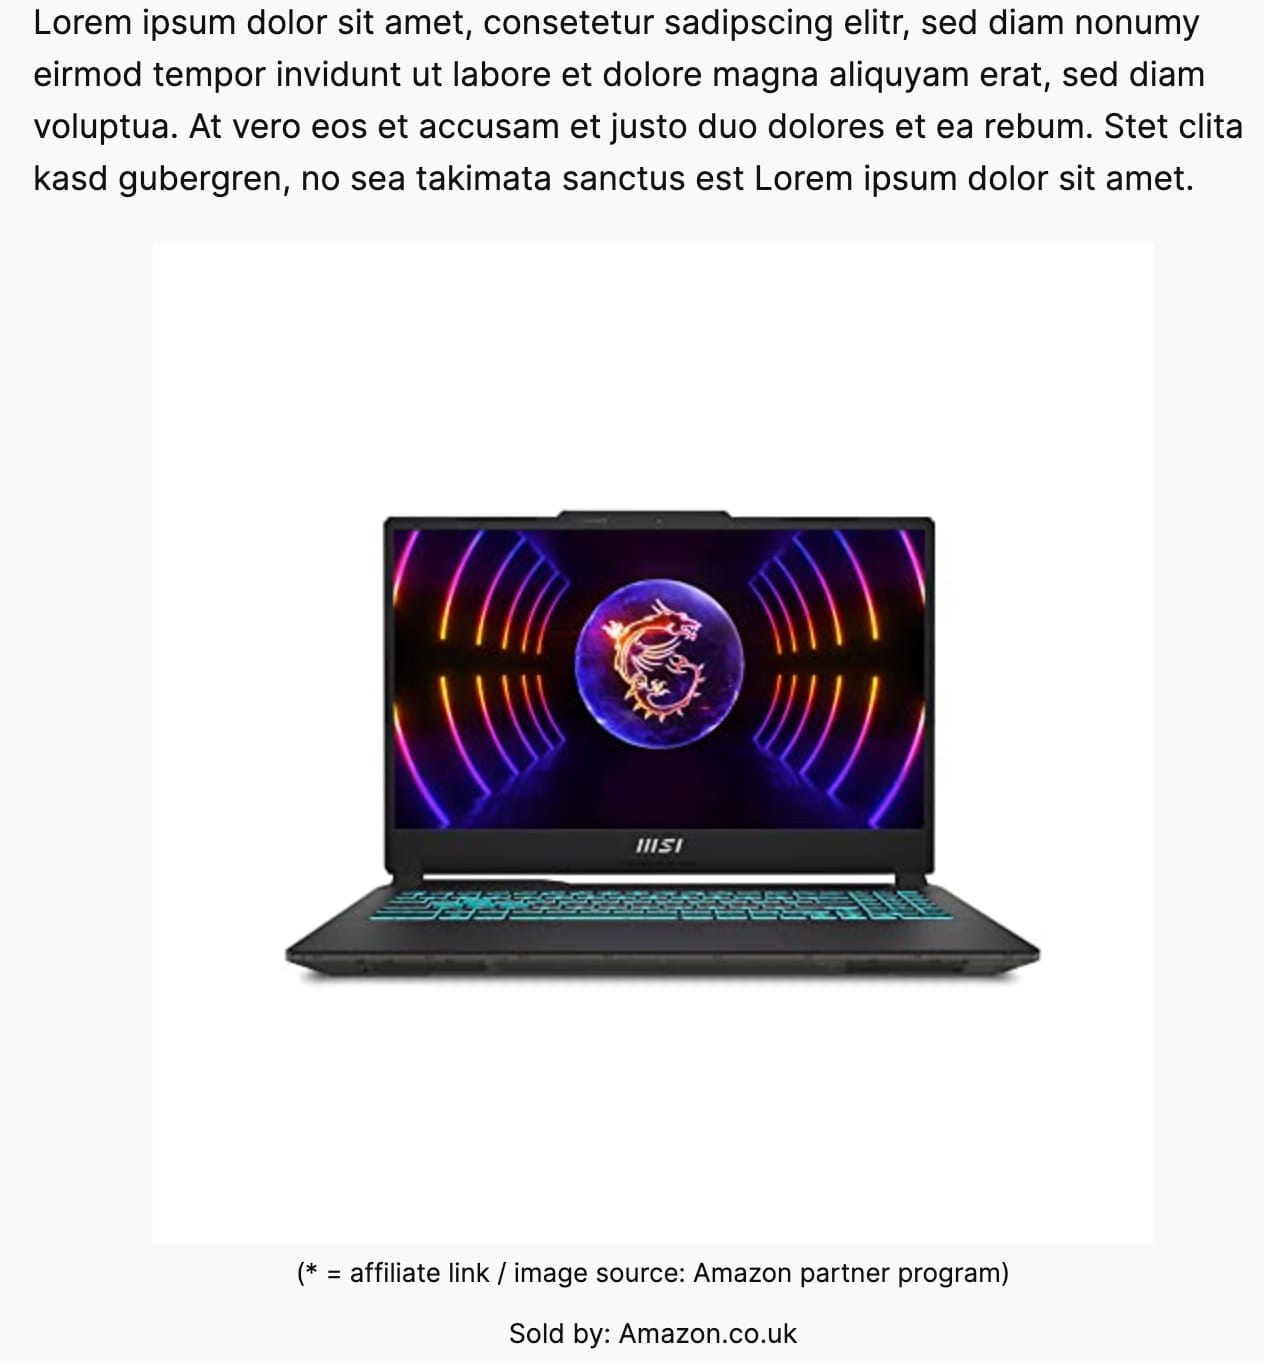 One product image from the Amazon Product Advertising API embedded in the site contents